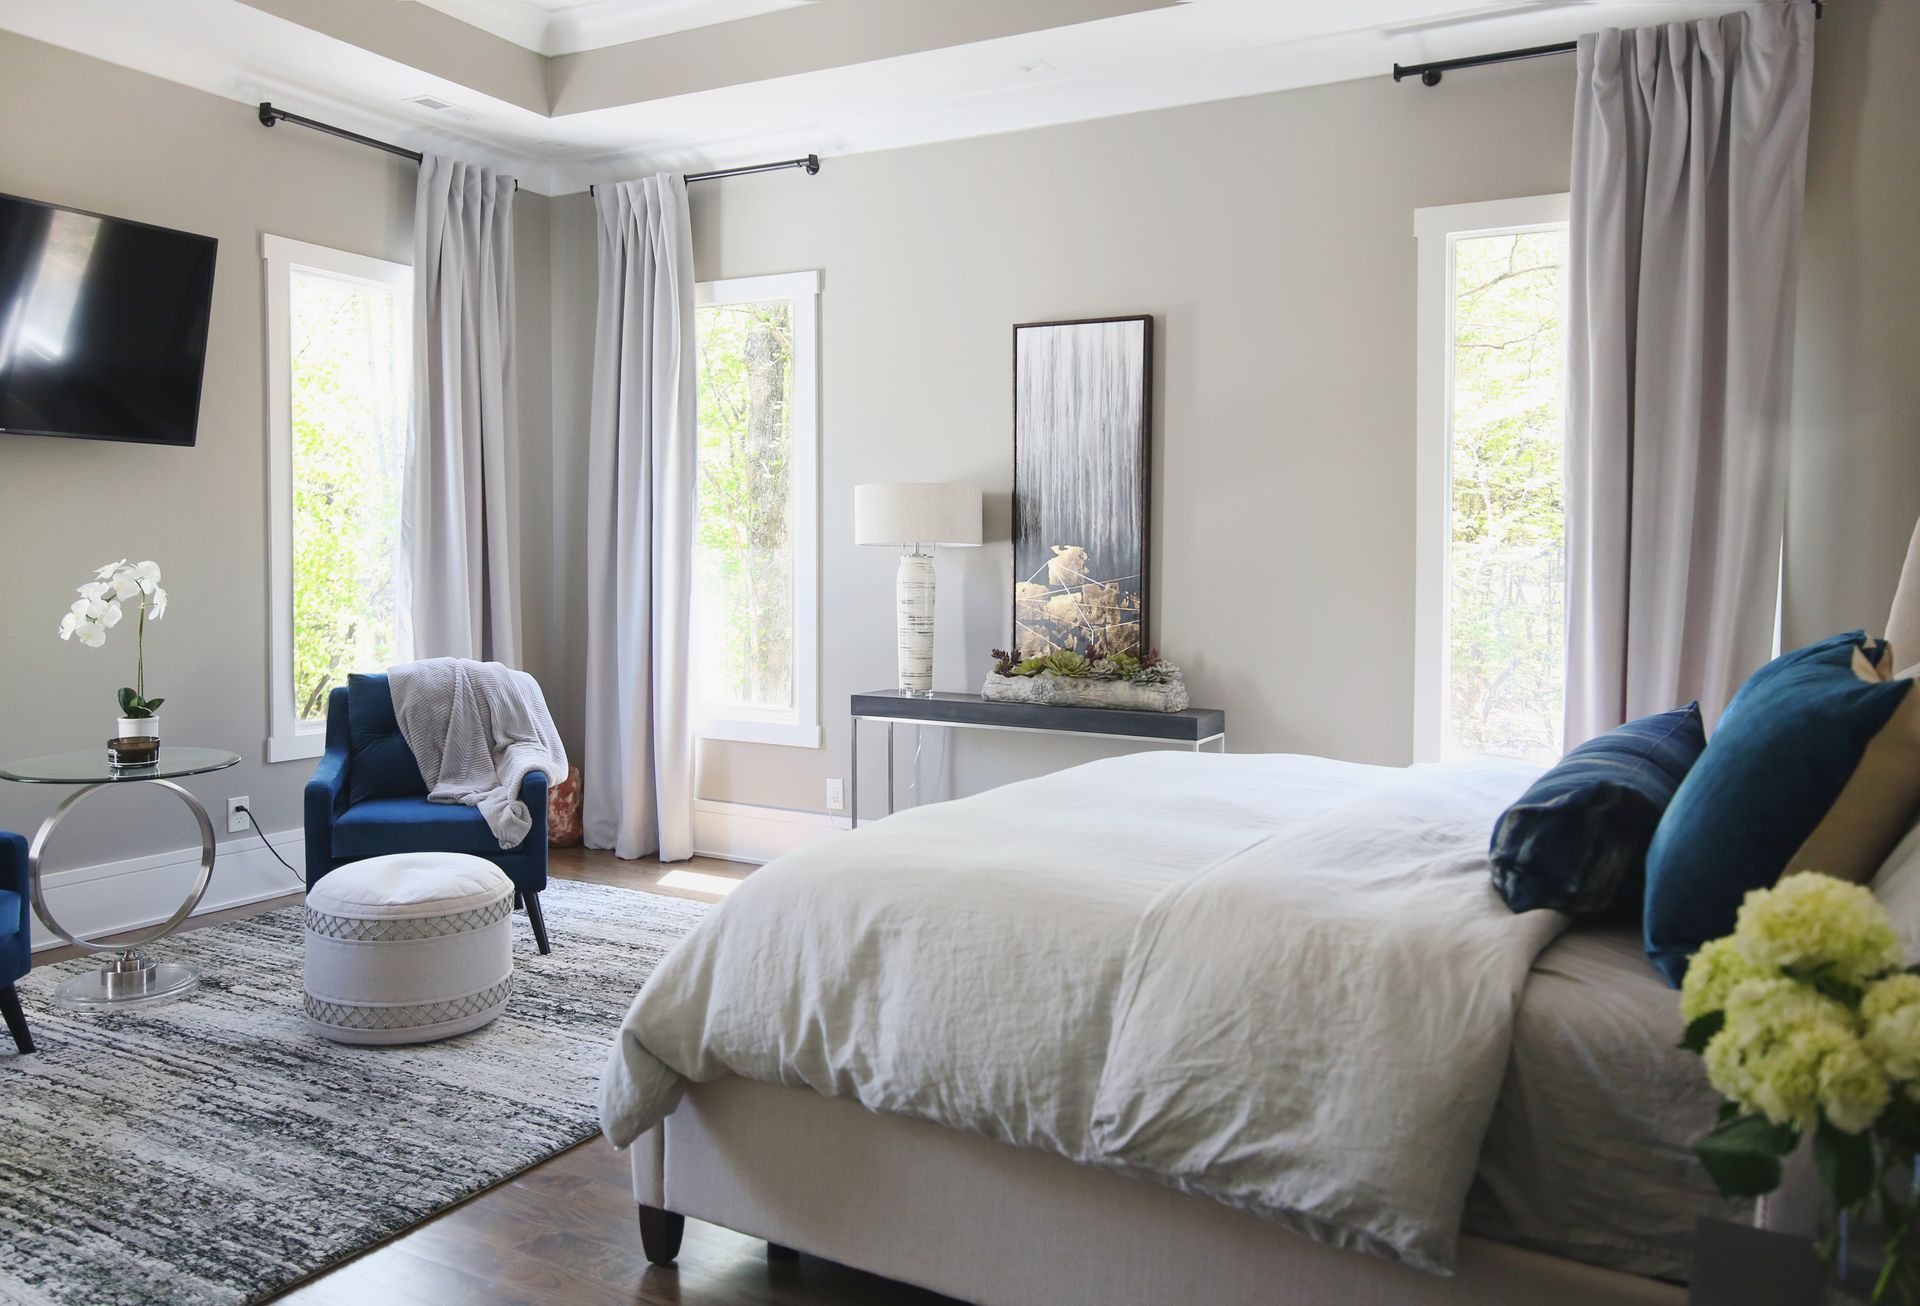 7 Quick & Easy Ways to Update Your Bedroom Without Renovating